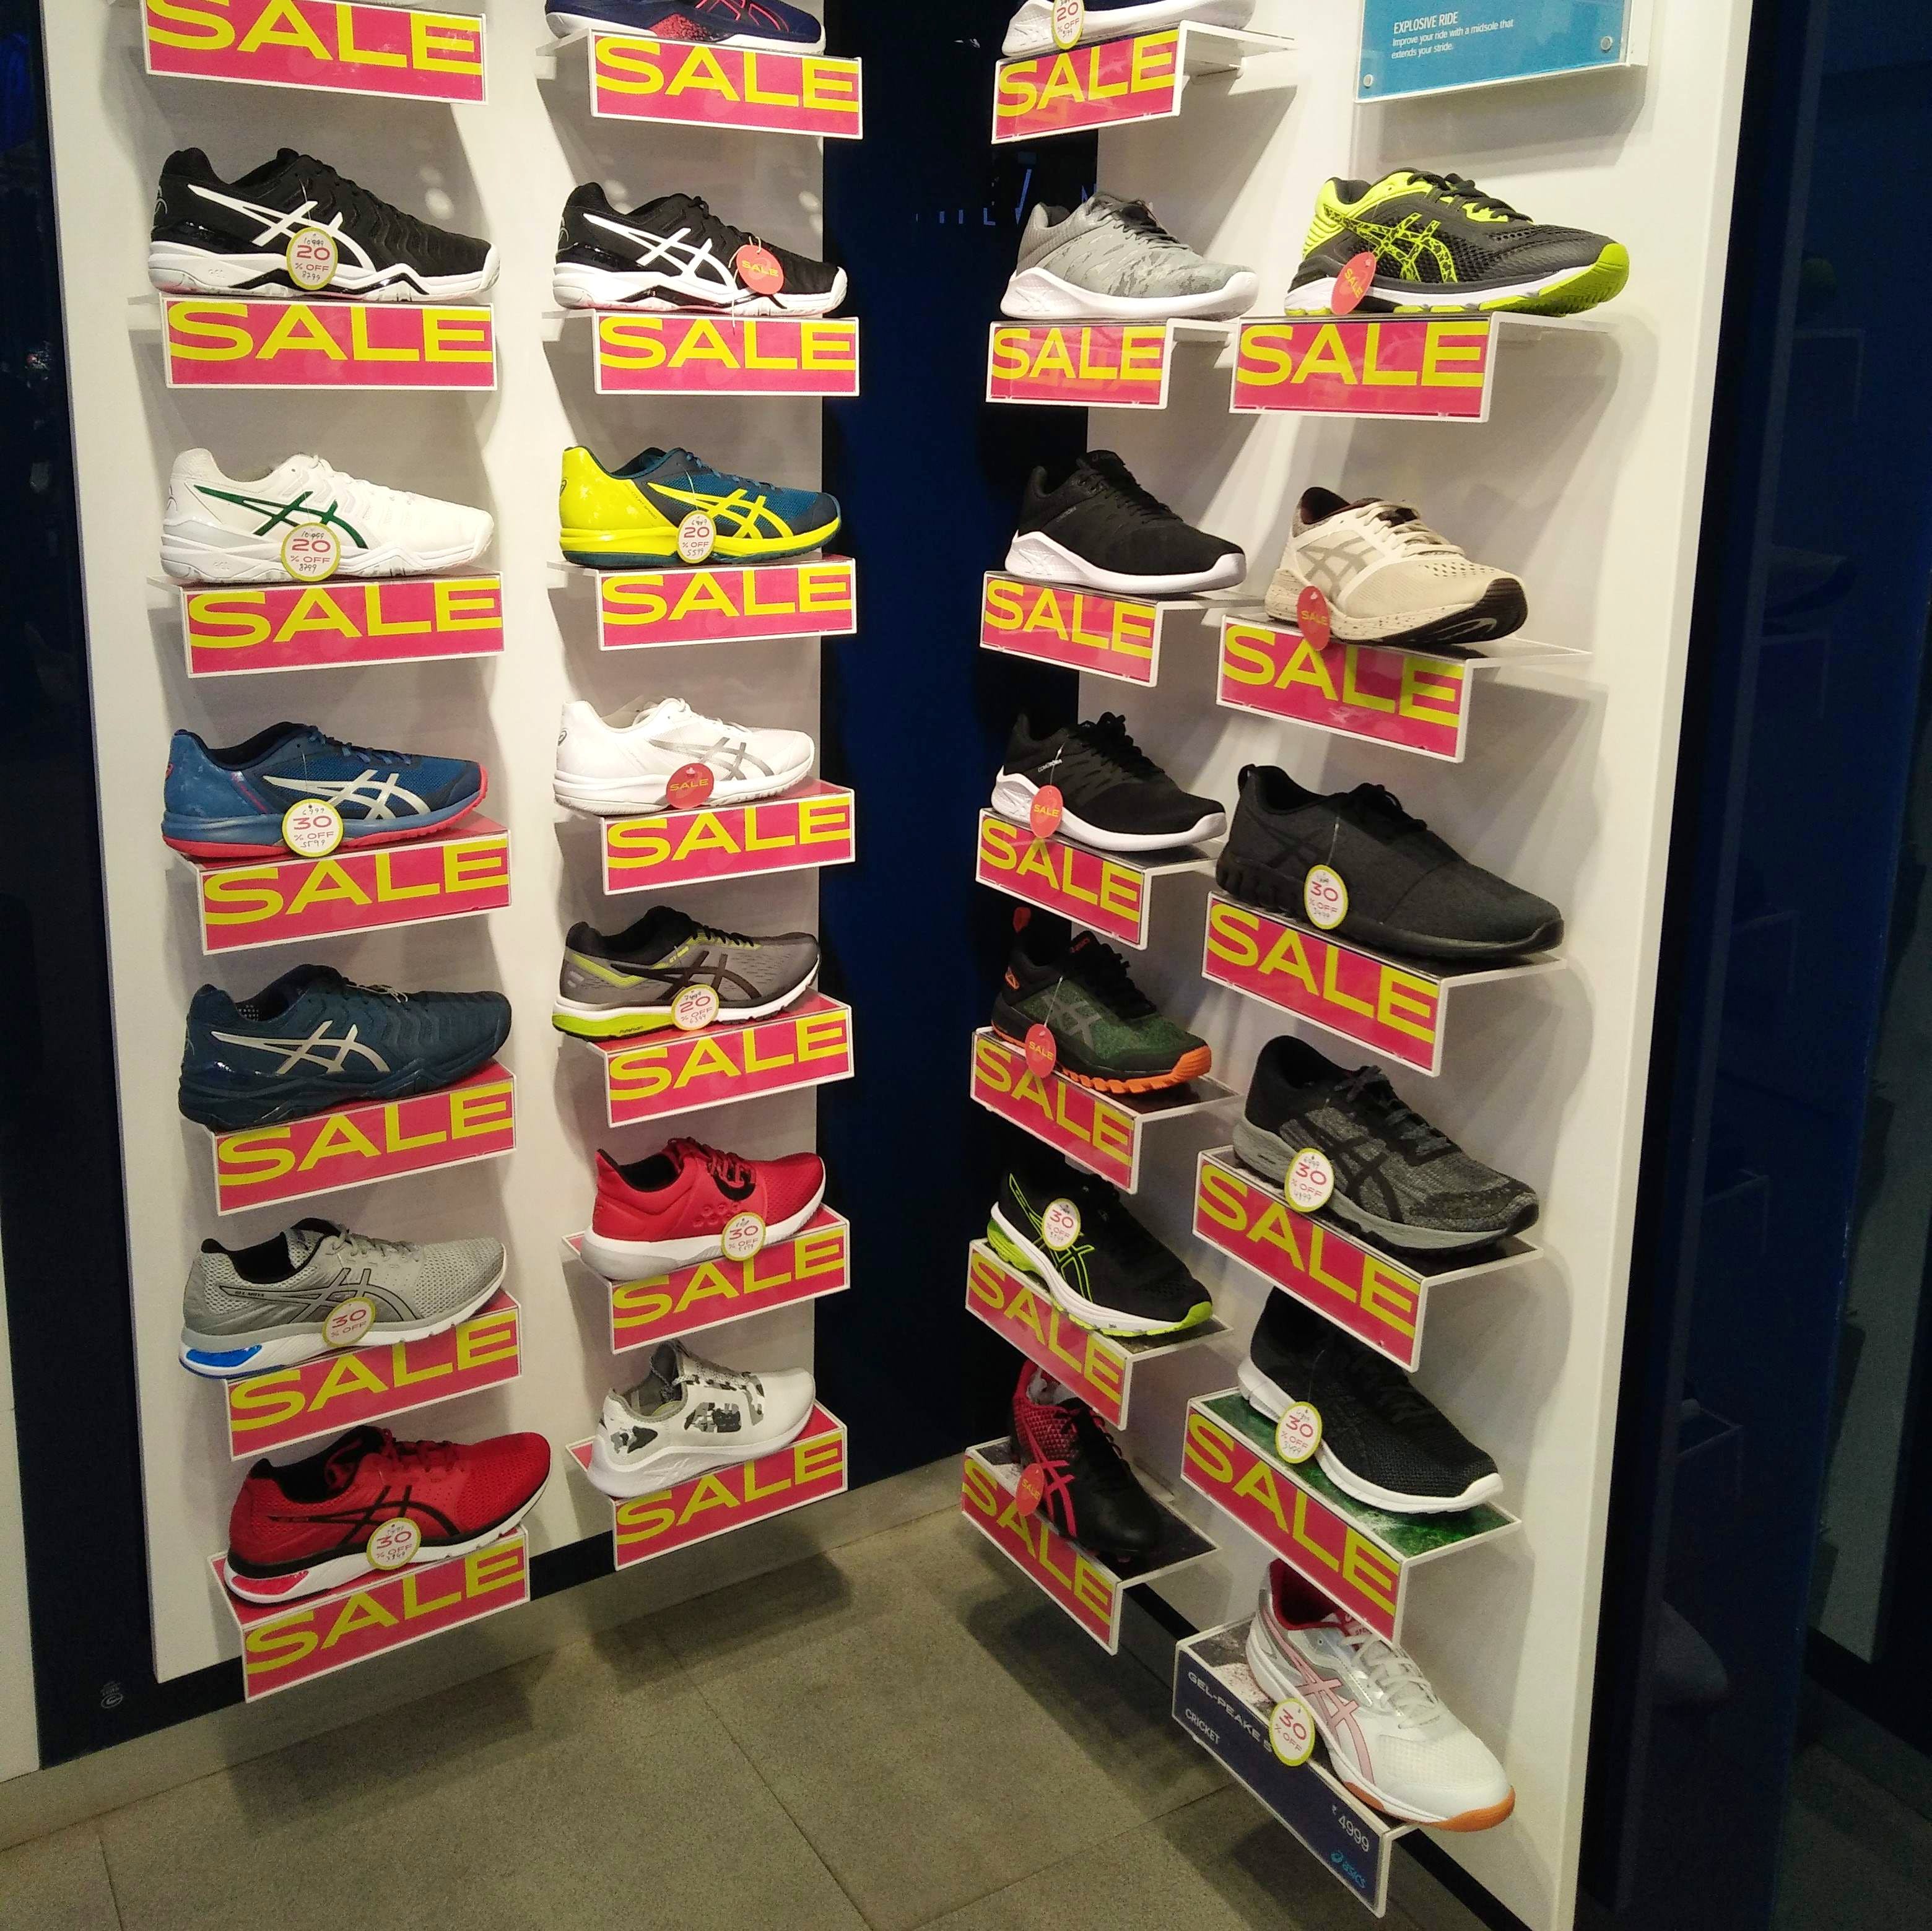 asics shoe stores near me, OFF 79%,Best 